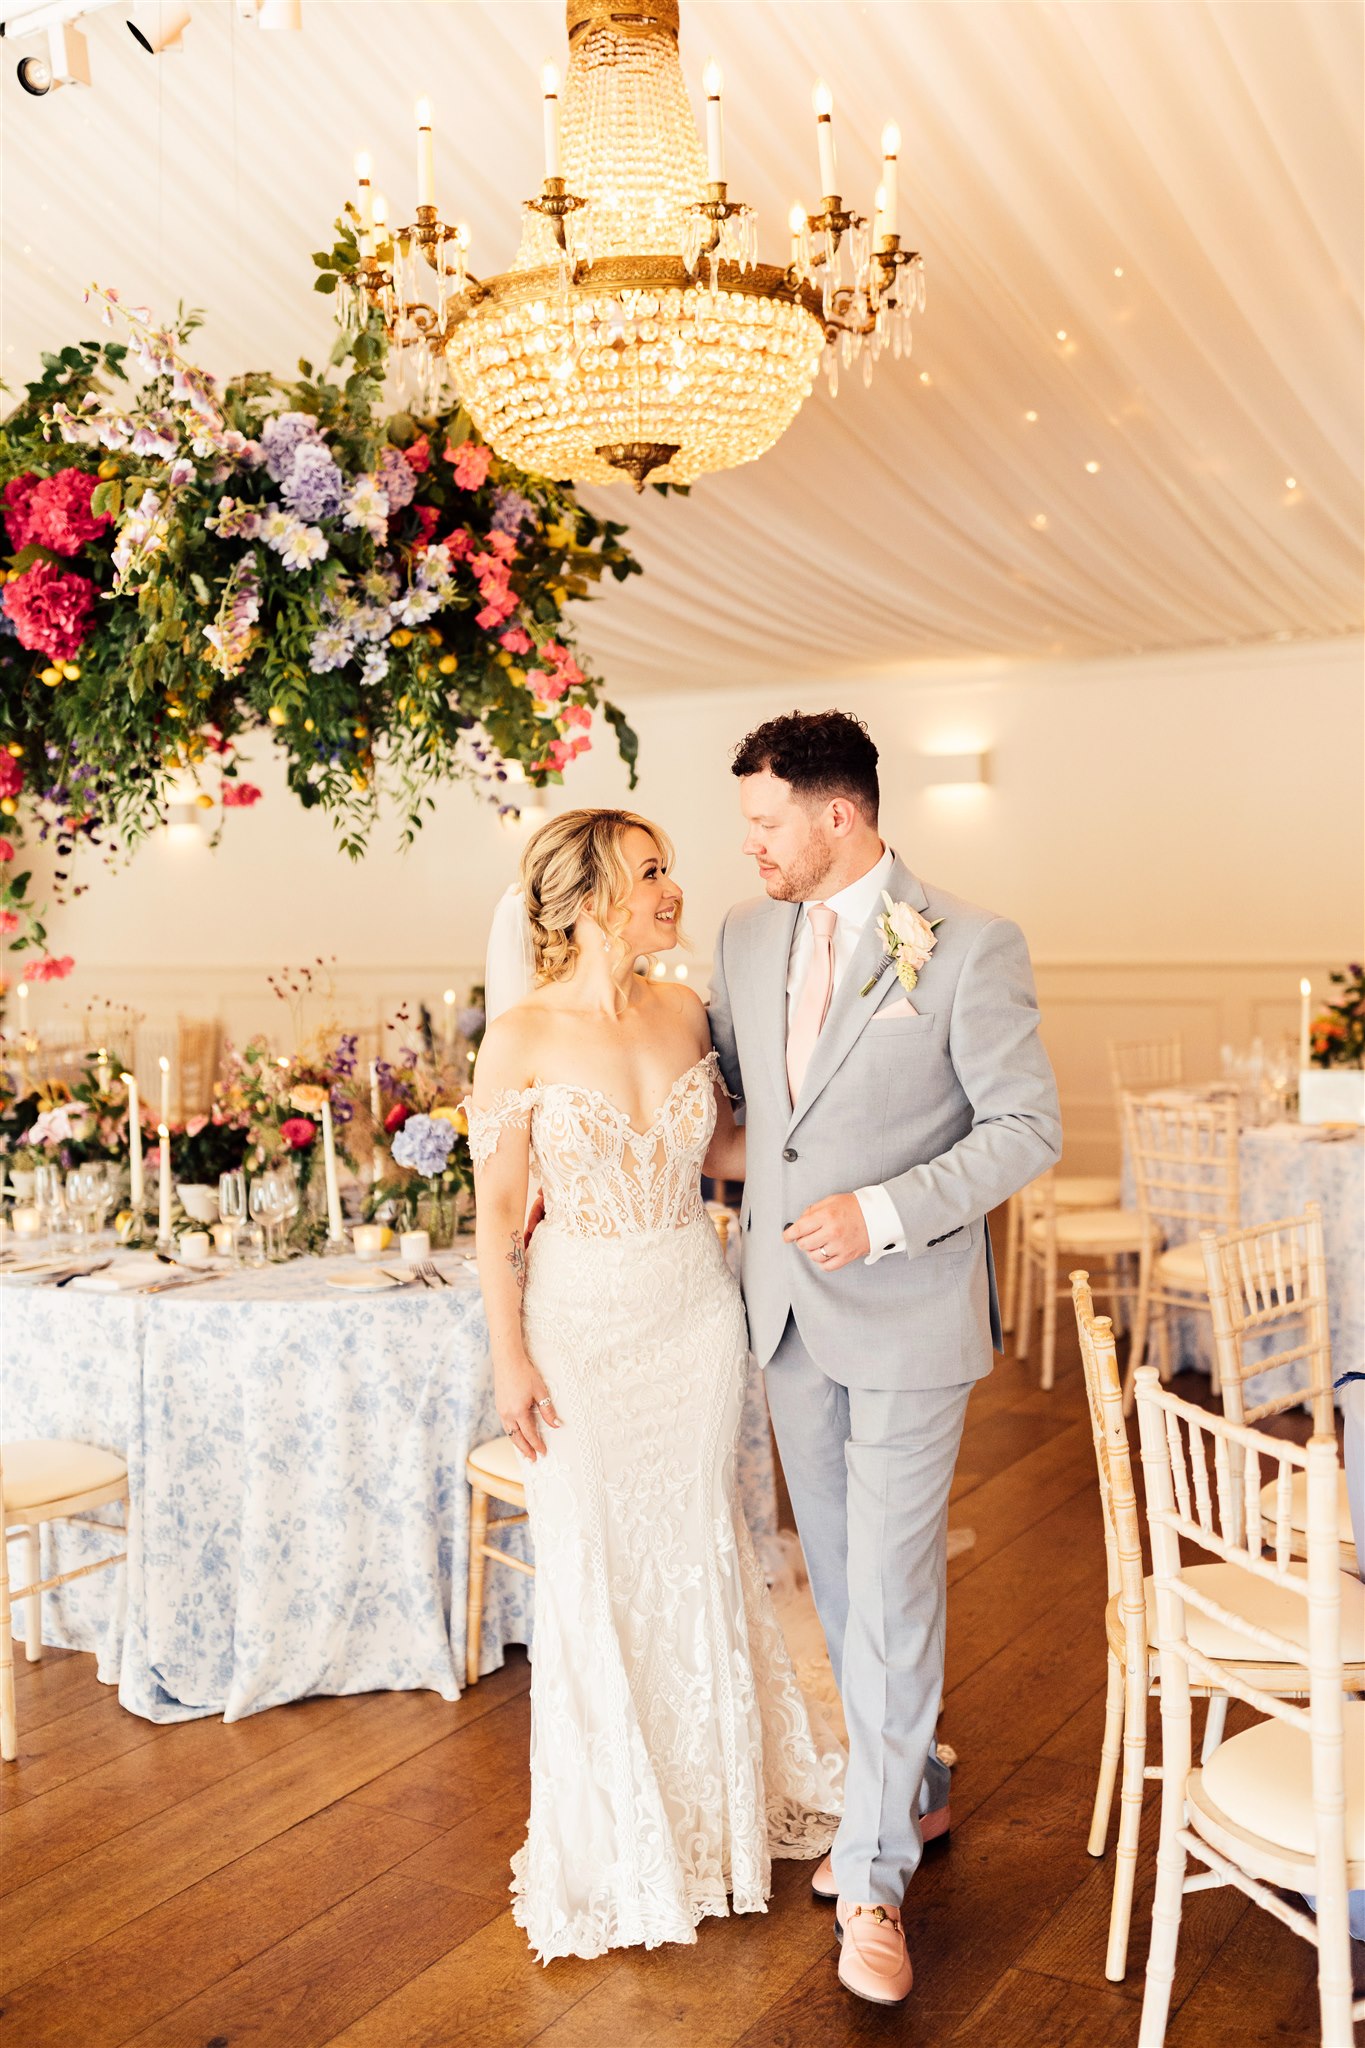 A huge crystal chandelier is suspended from the ceiling of a wedding marquee next to a hanging floral arrangement filled with green foliage and pink, blue and lilac tones. Underneath is an oval table with a blue toile tablecloth on which are more flowers and cream lit candles.